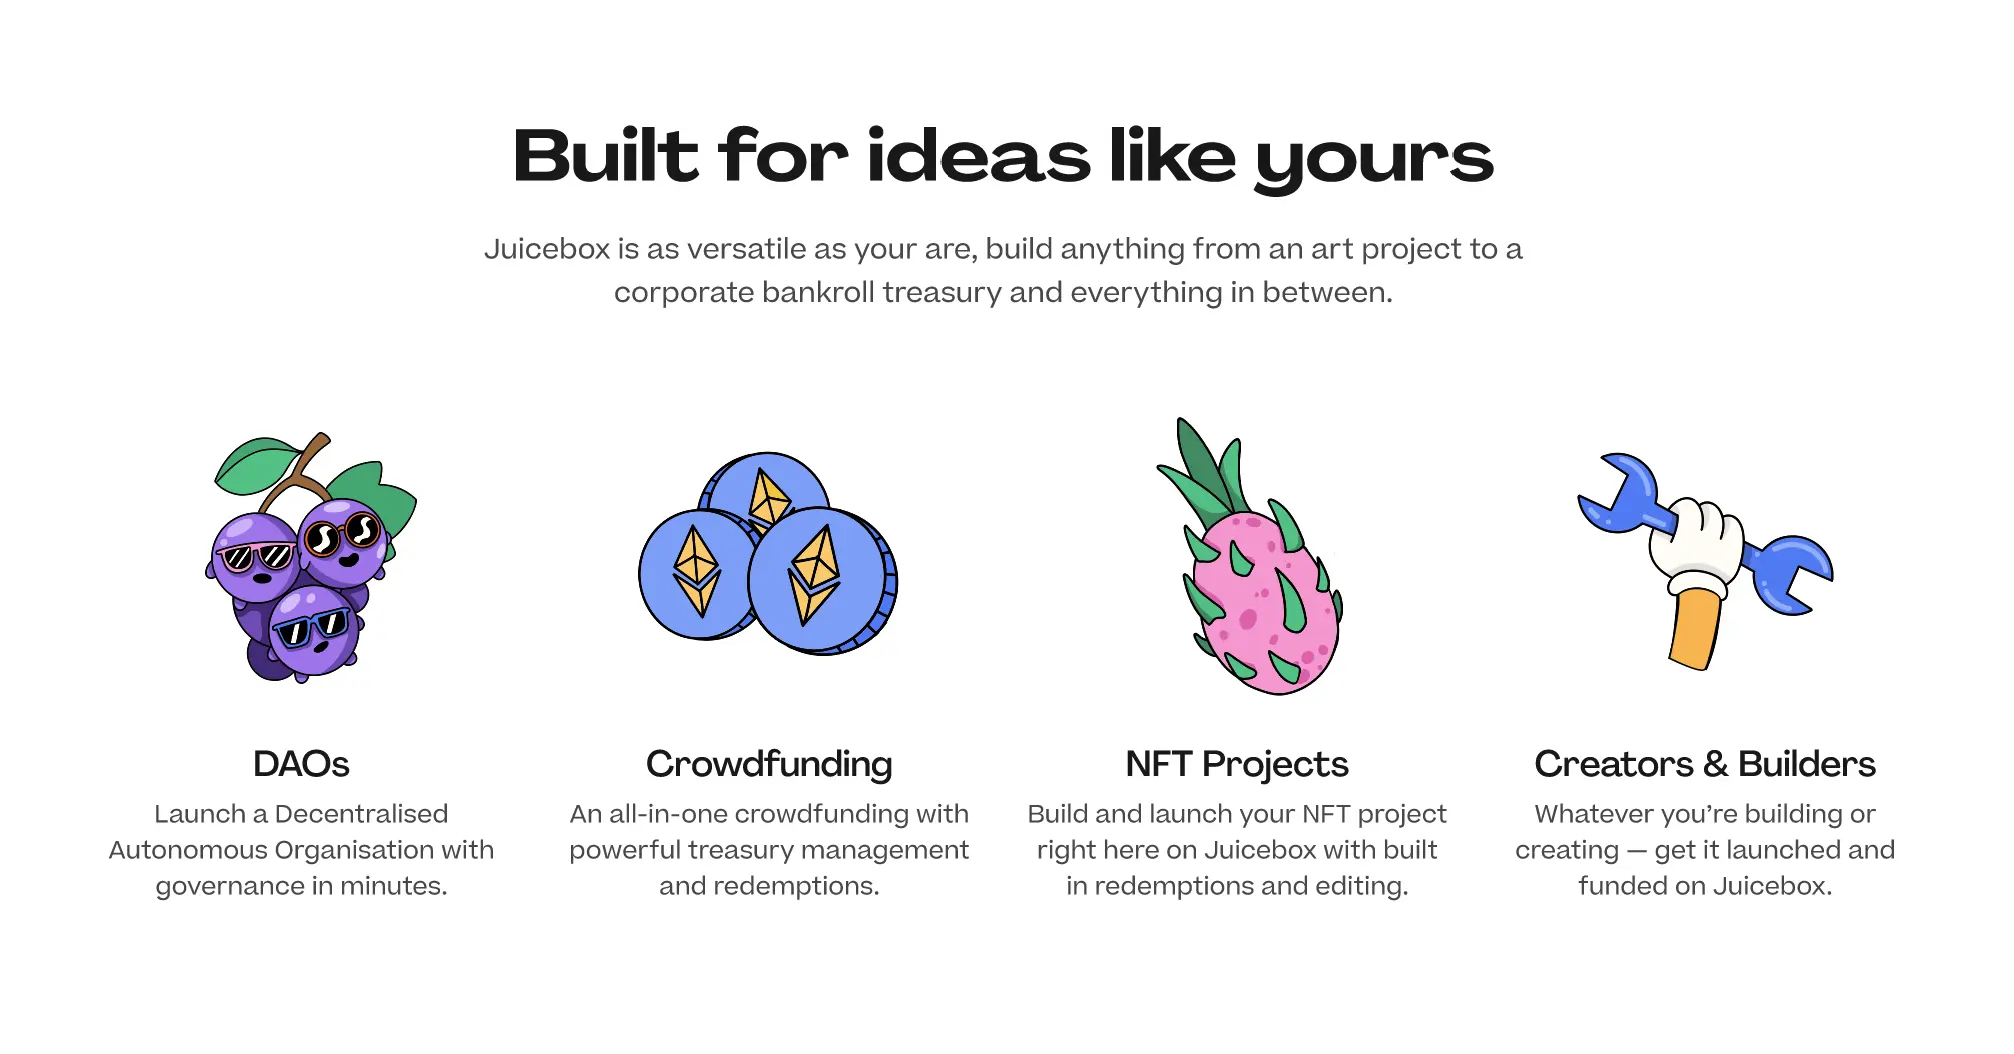 Features section: built for ideas like yours